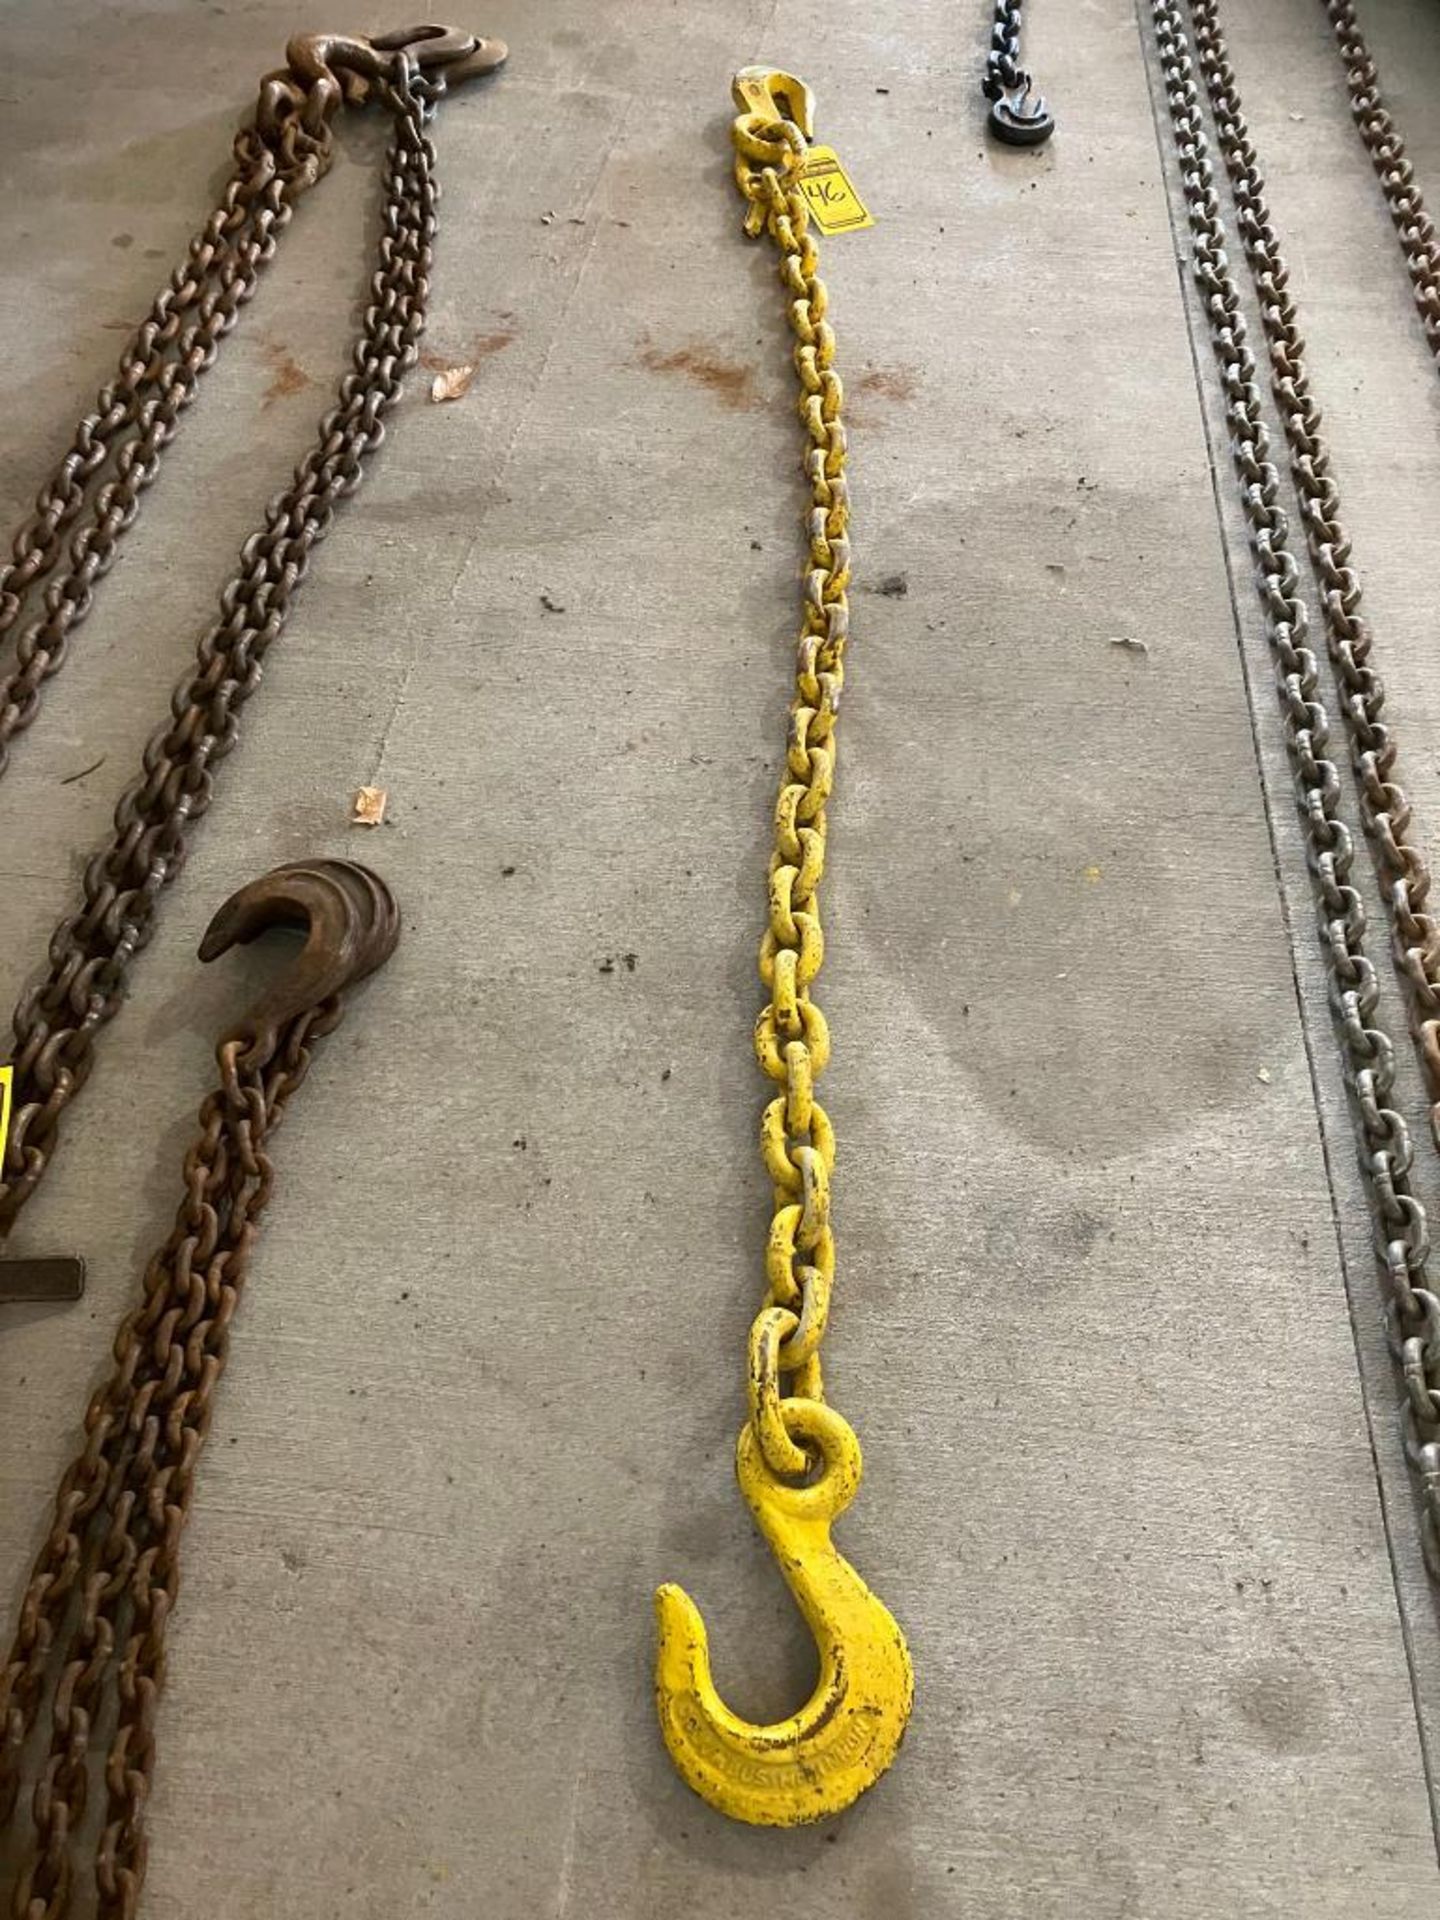 Herc-Alloy 3/4'' Chain, 90'' Length - Image 2 of 2